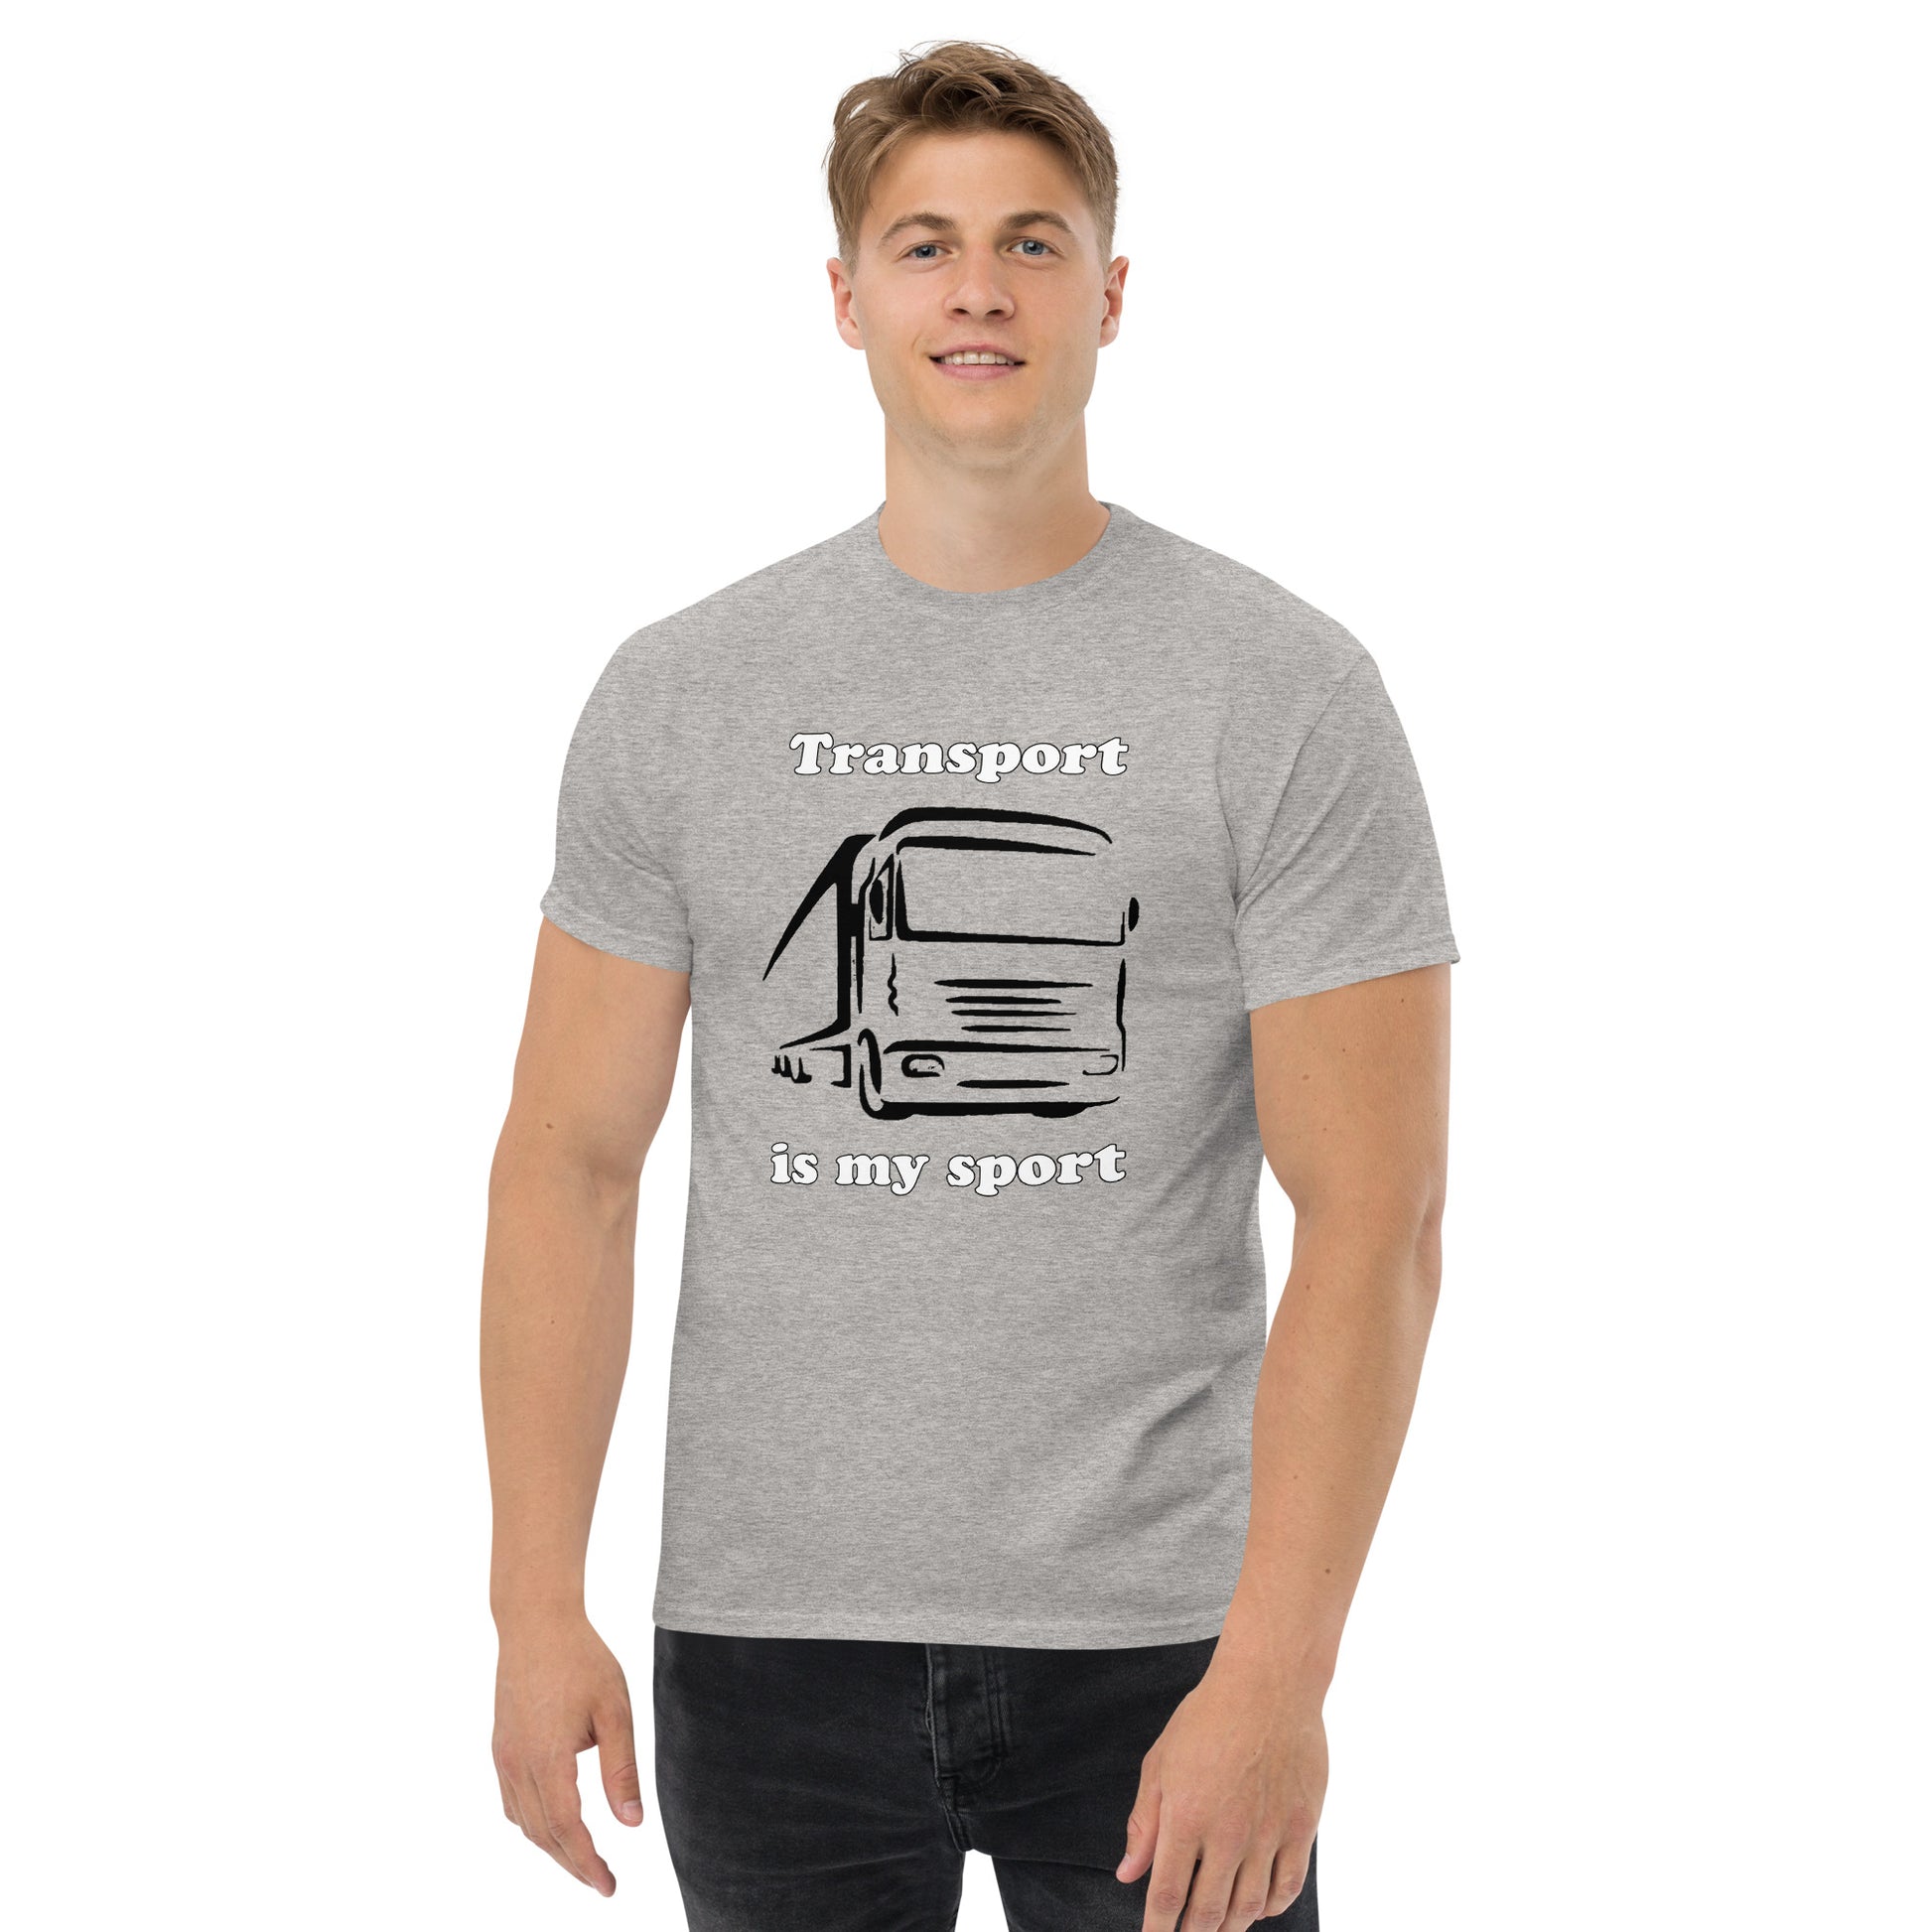 Man with grey t-shirt with picture of truck and text "Transport is my sport"